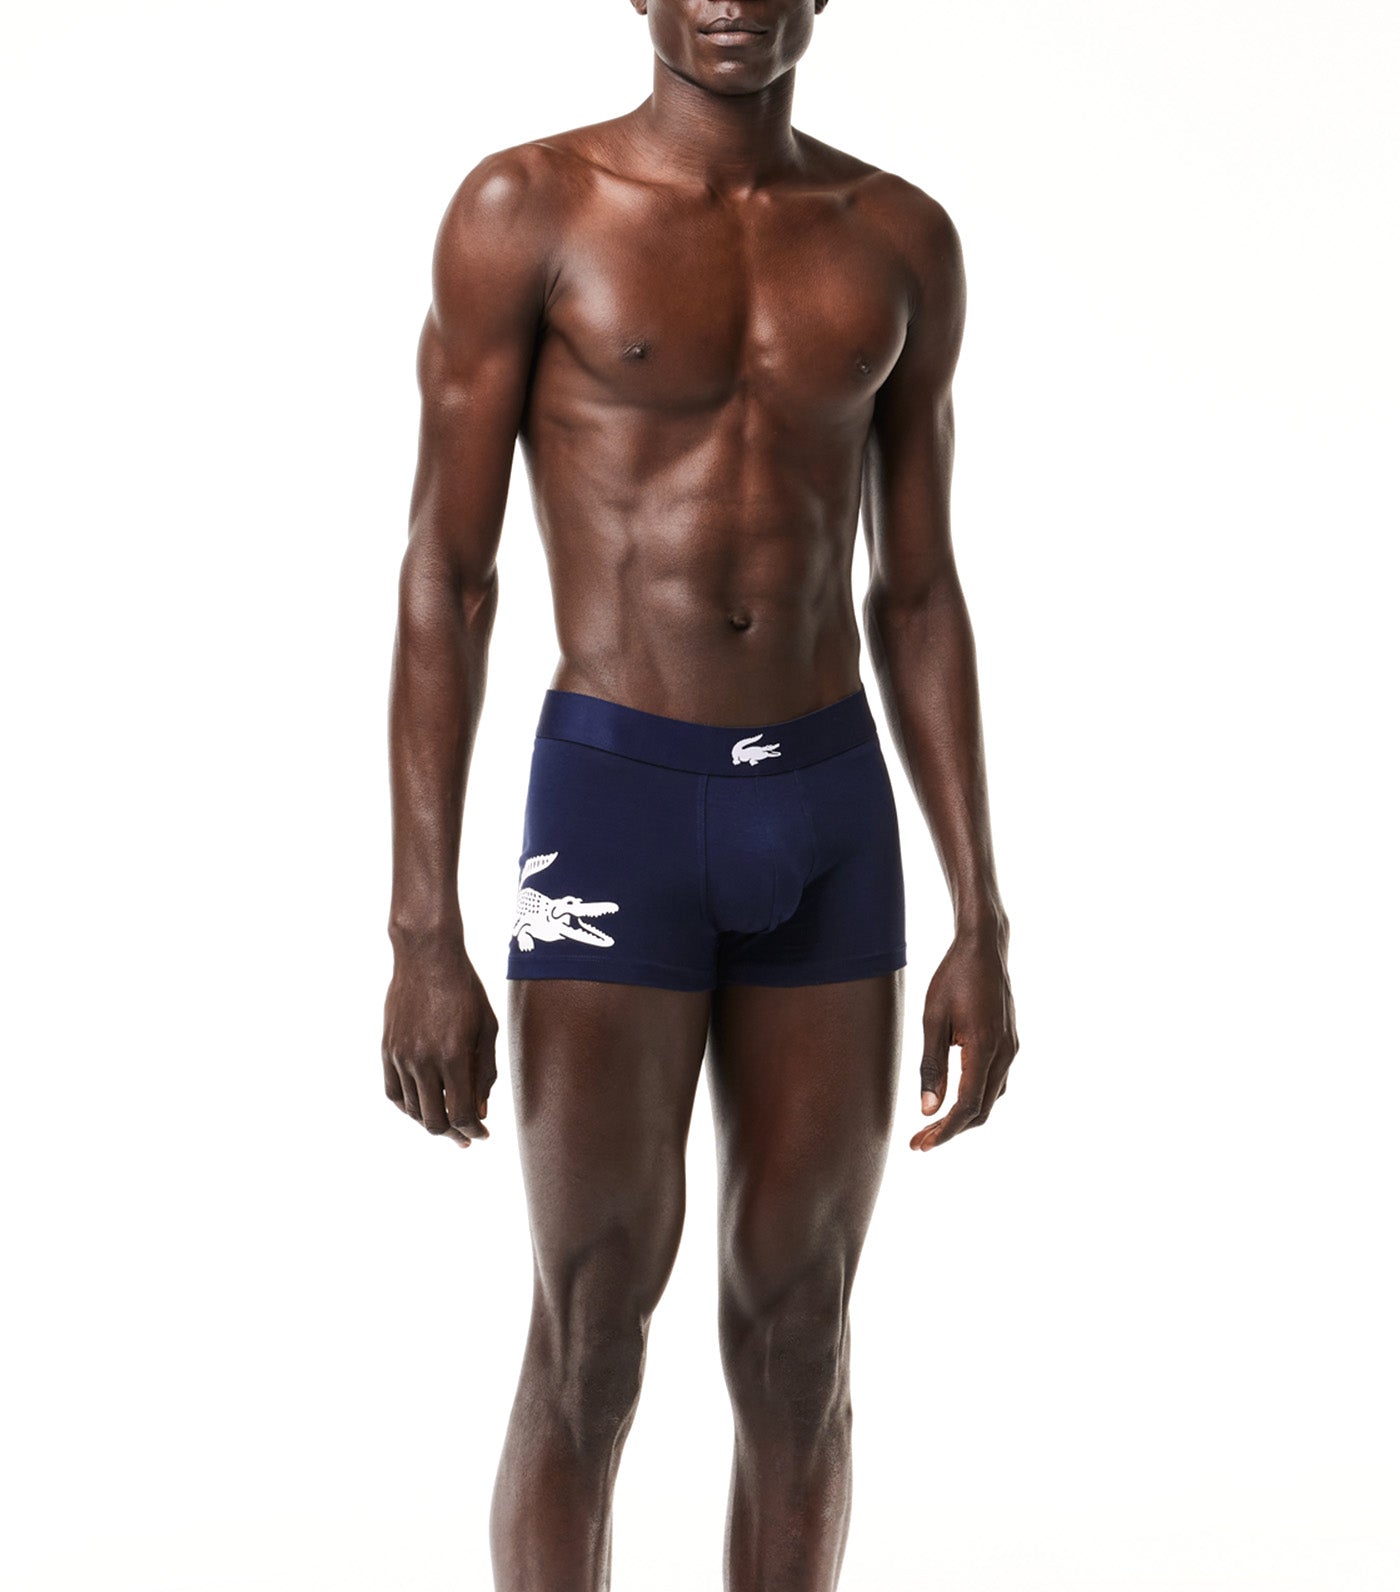 Pack of 3 Casual Boxer Briefs Navy Blue/White/Silver Chine